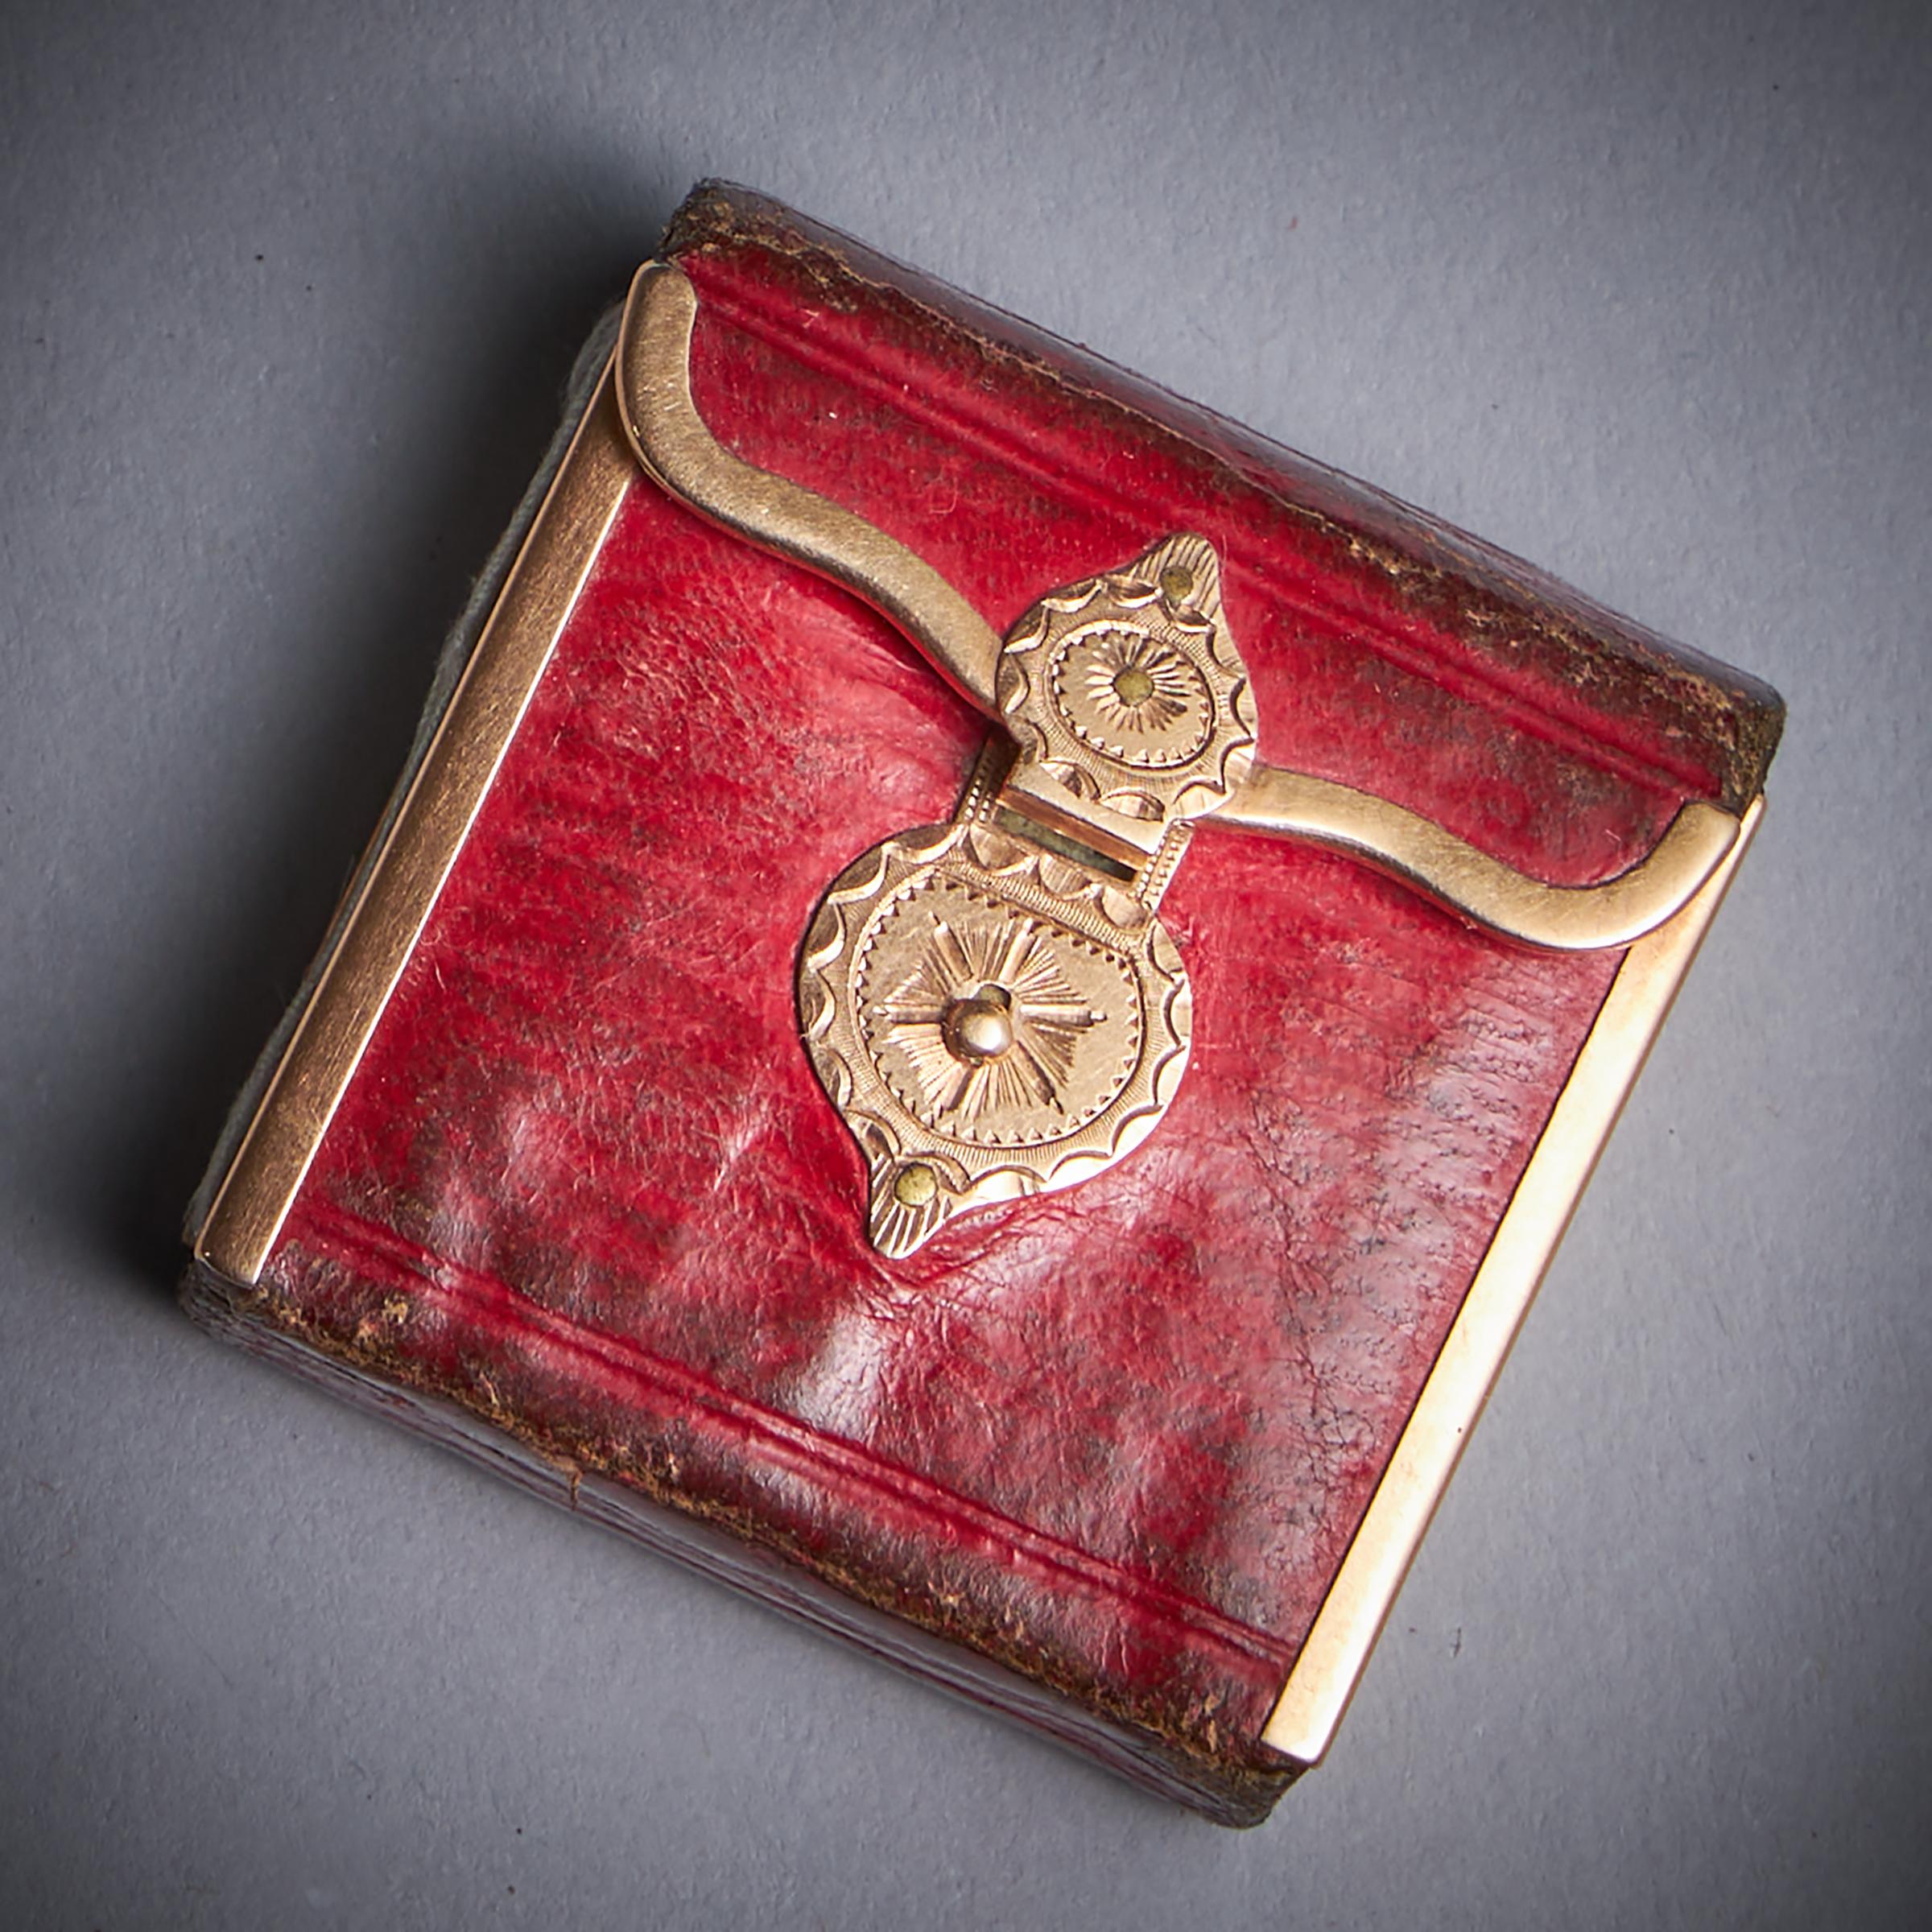 19th Century From Queen Charlotte, A Rare Miniature Gold Mounted George III Almanac, 1817 For Sale